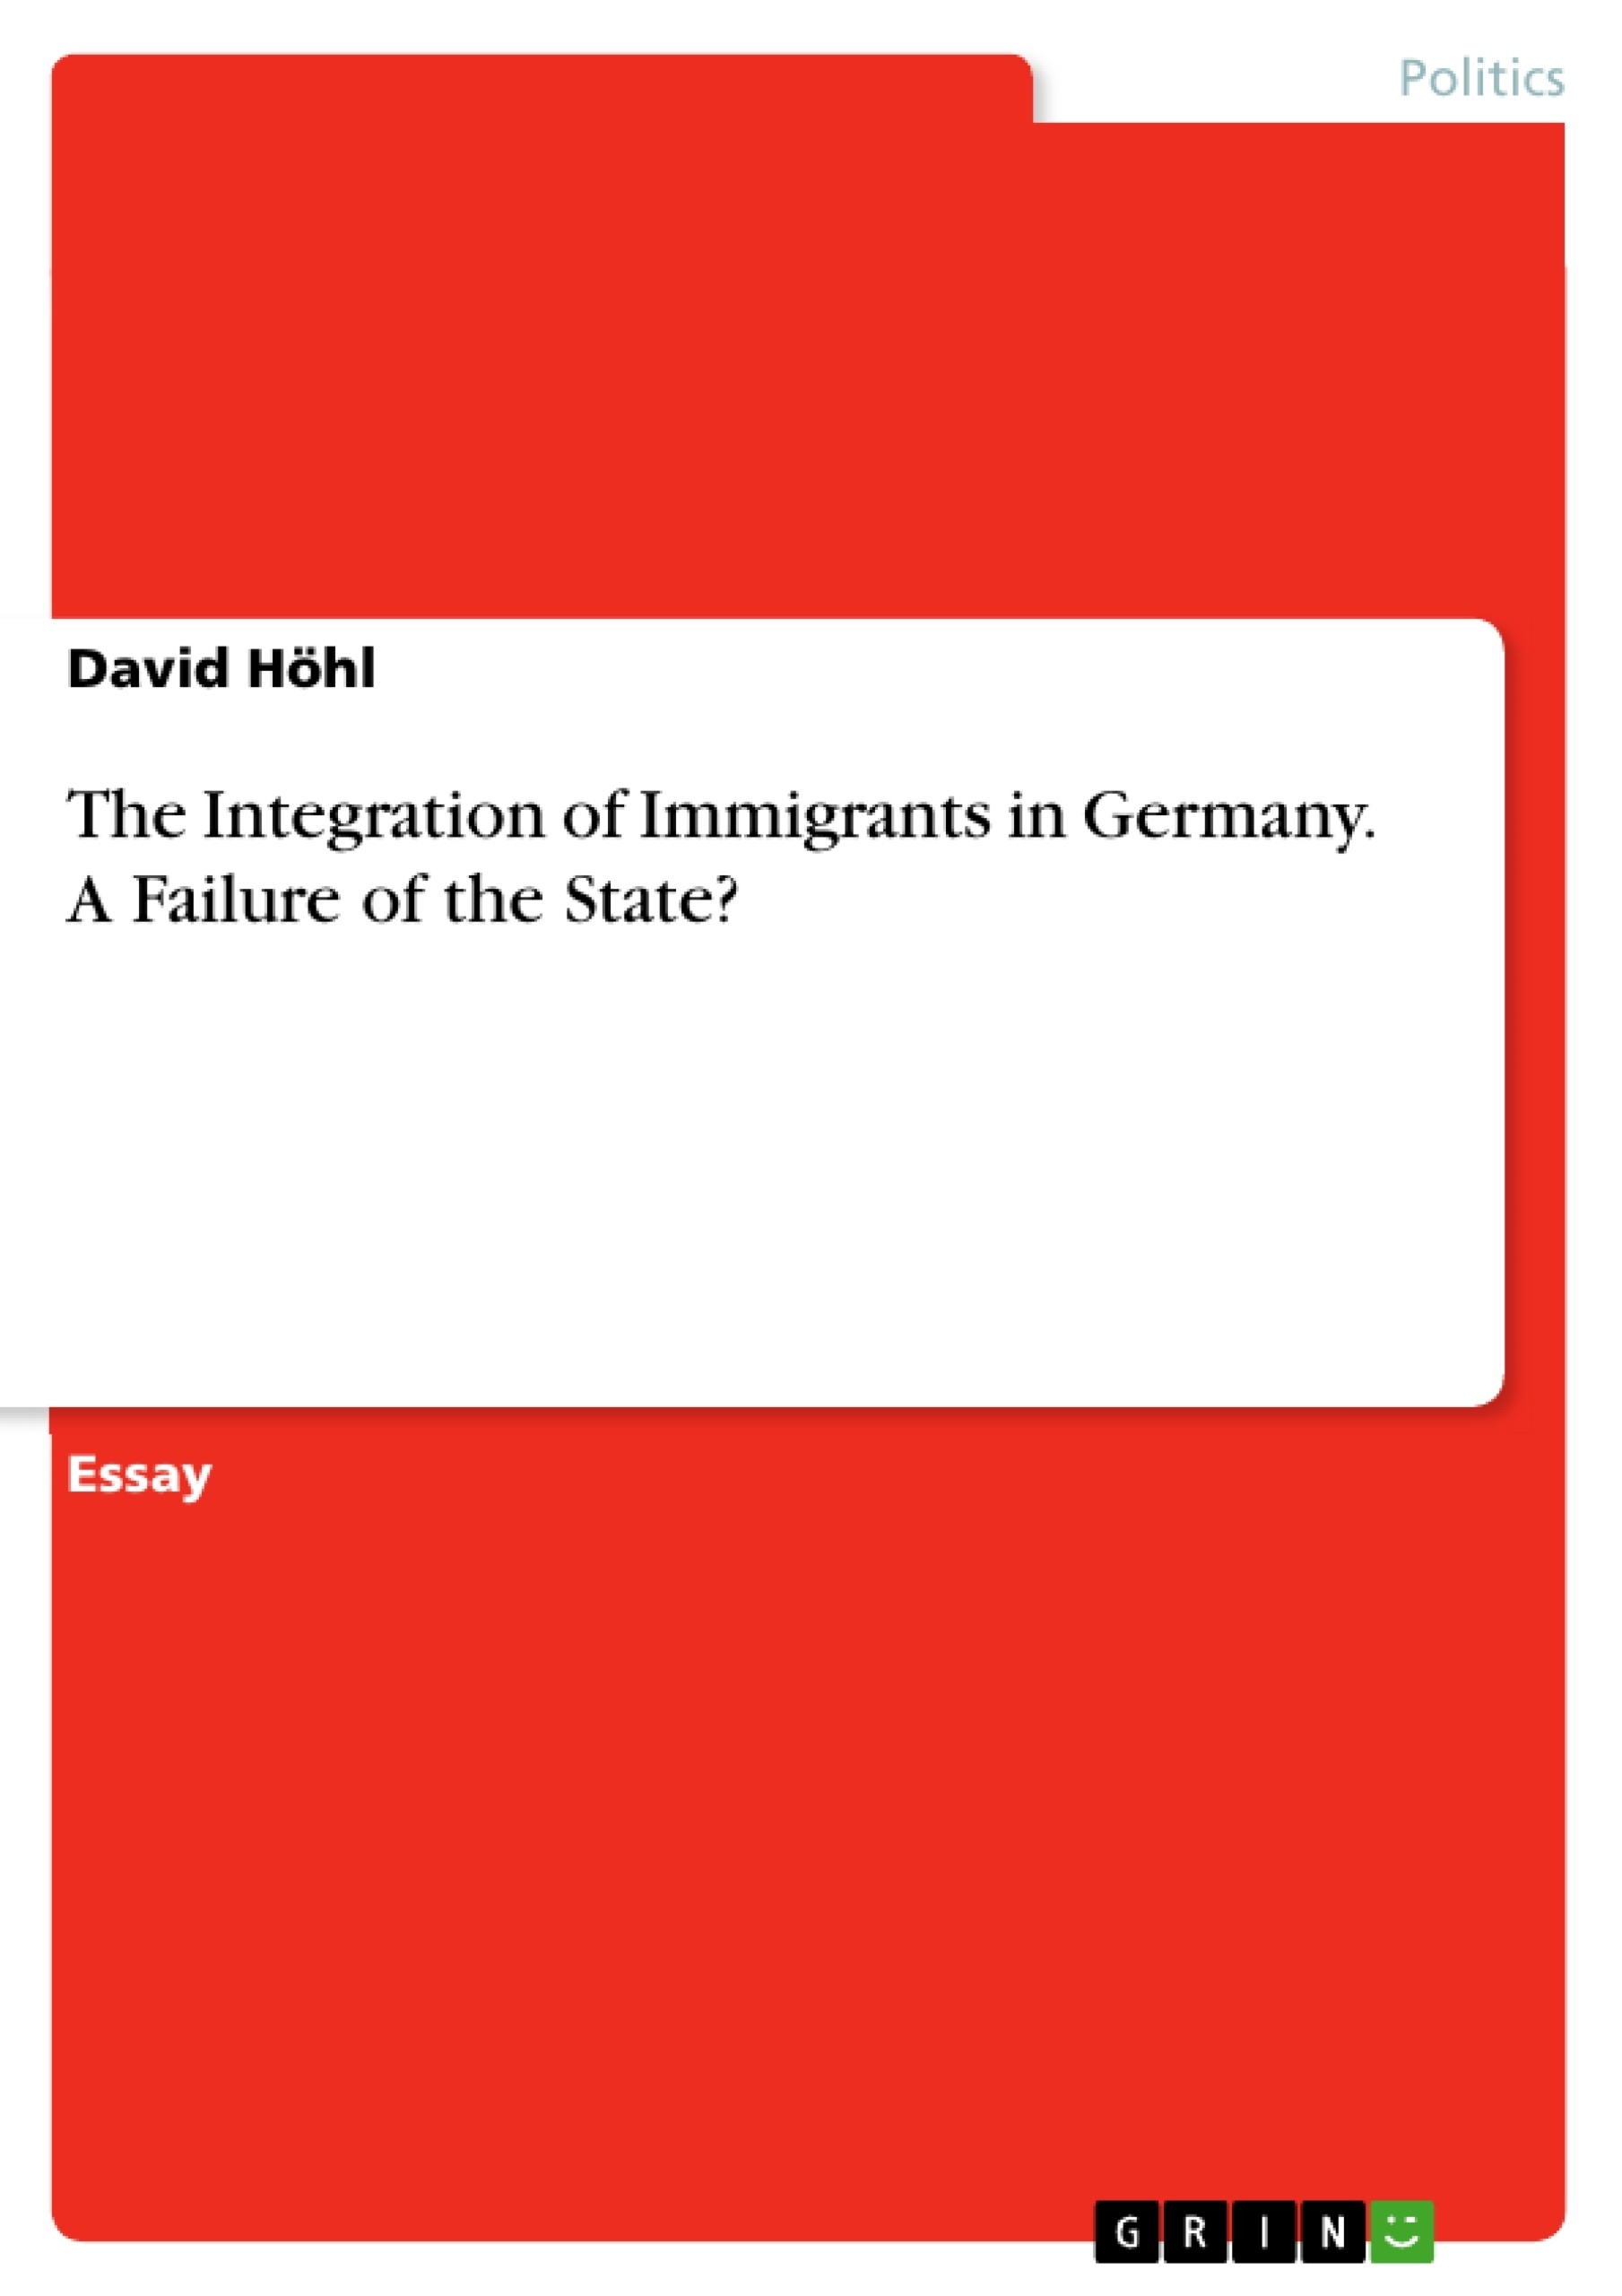 Título: The Integration of Immigrants in Germany. A Failure of the State?